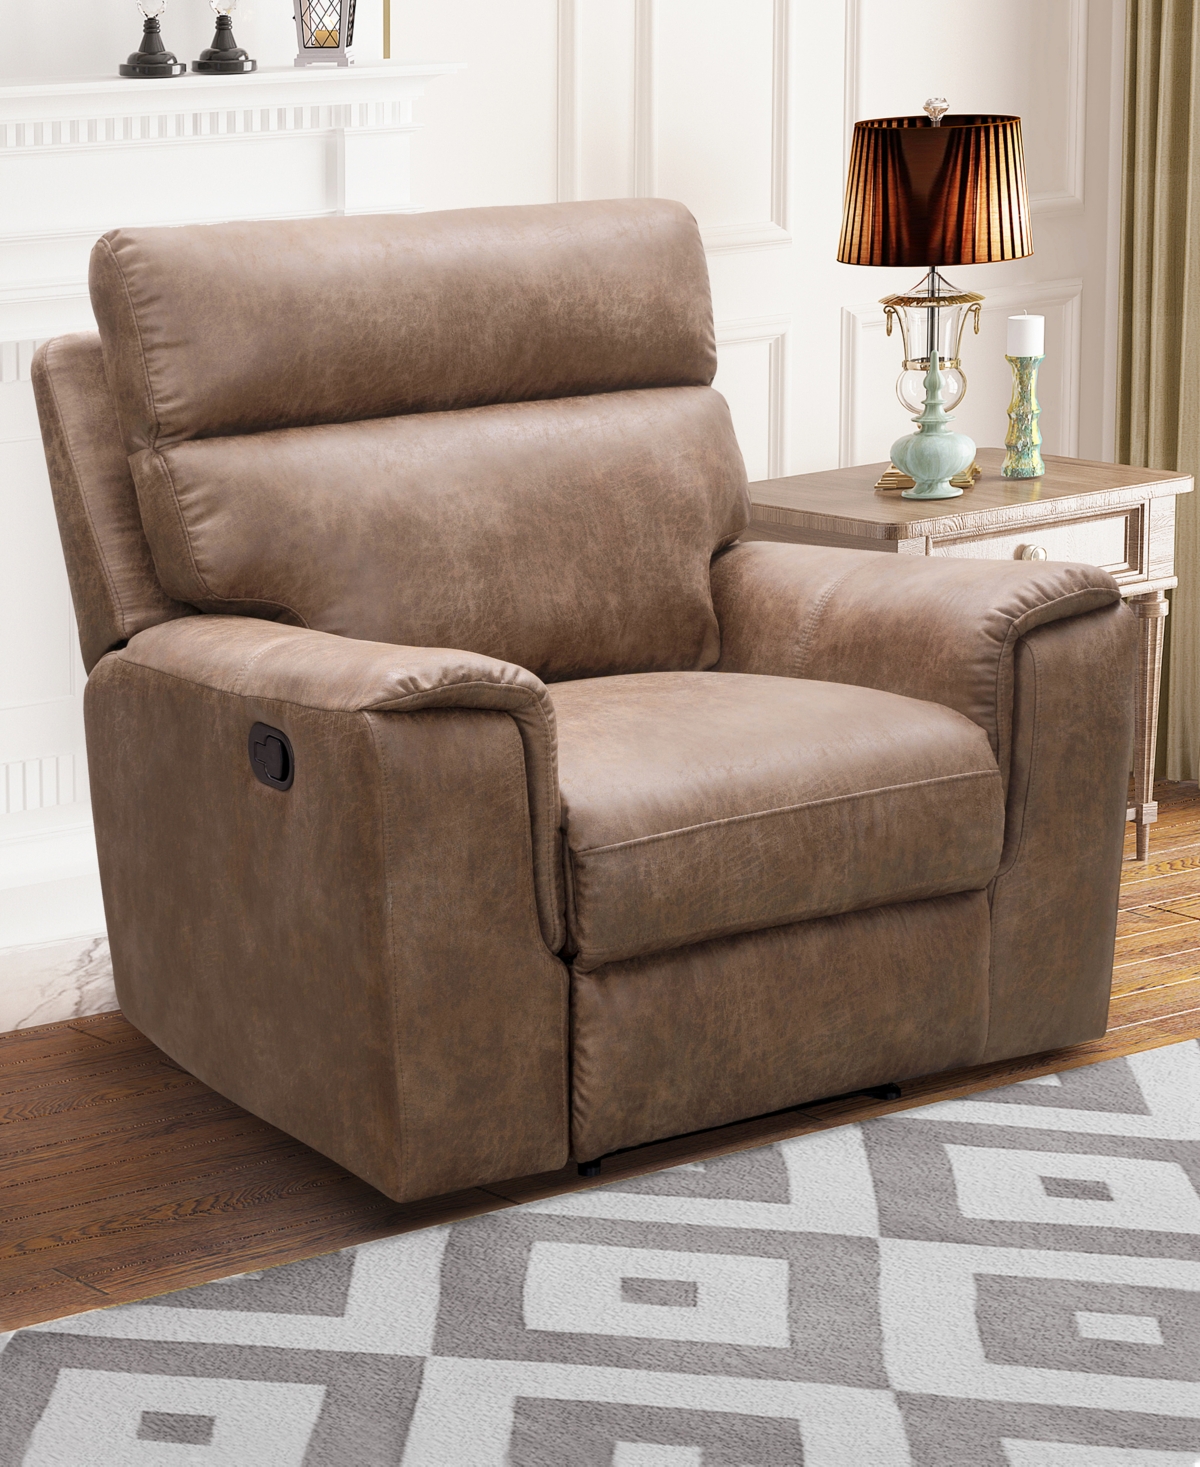 Shop Abbyson Living Lawrence 39.5" Fabric Recliner In Camel